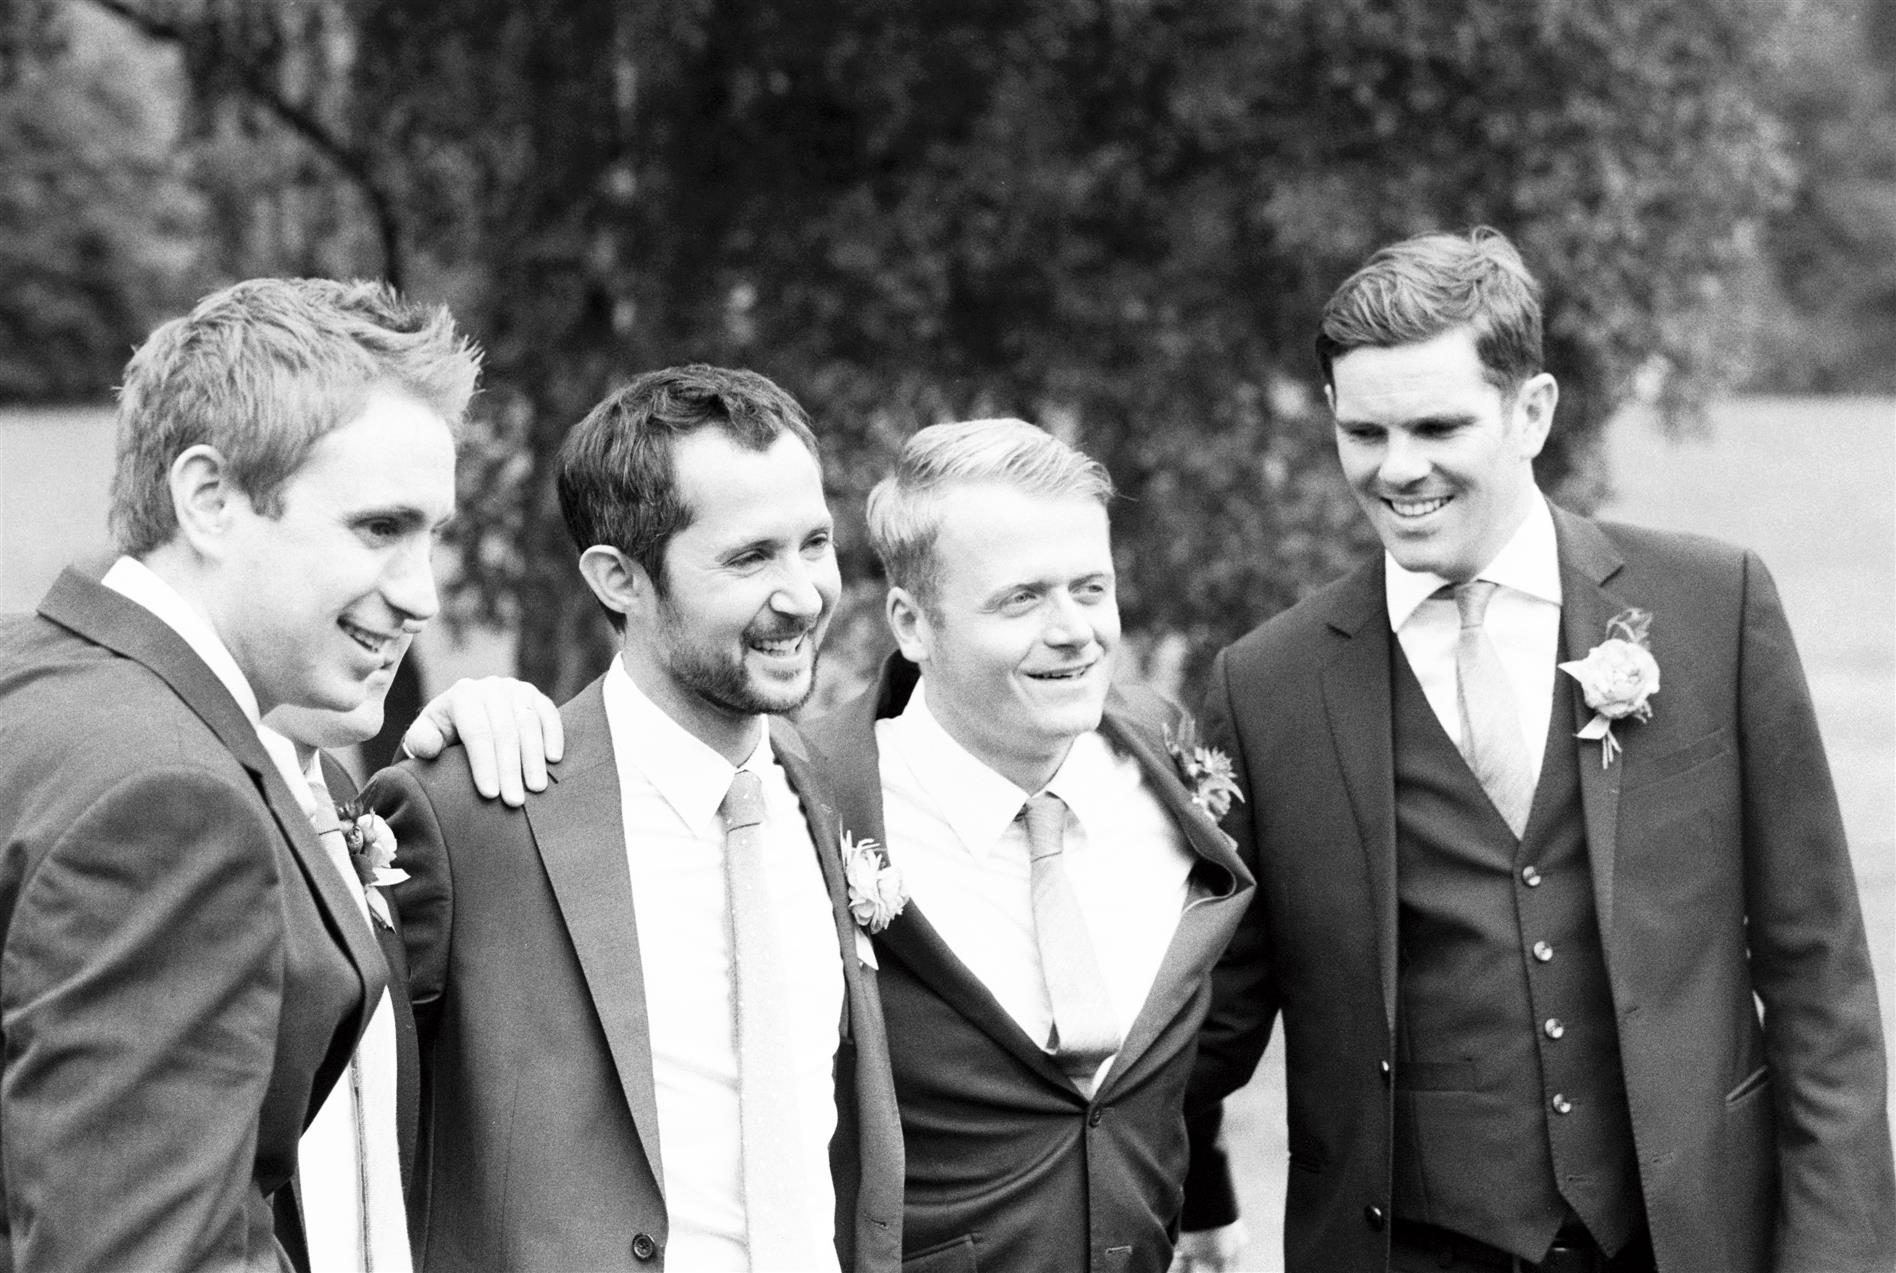 Groom & Groomsmen - A 1940s Wedding Dress for a Sweet Early Summer Wedding from Taylor & Porter Photography